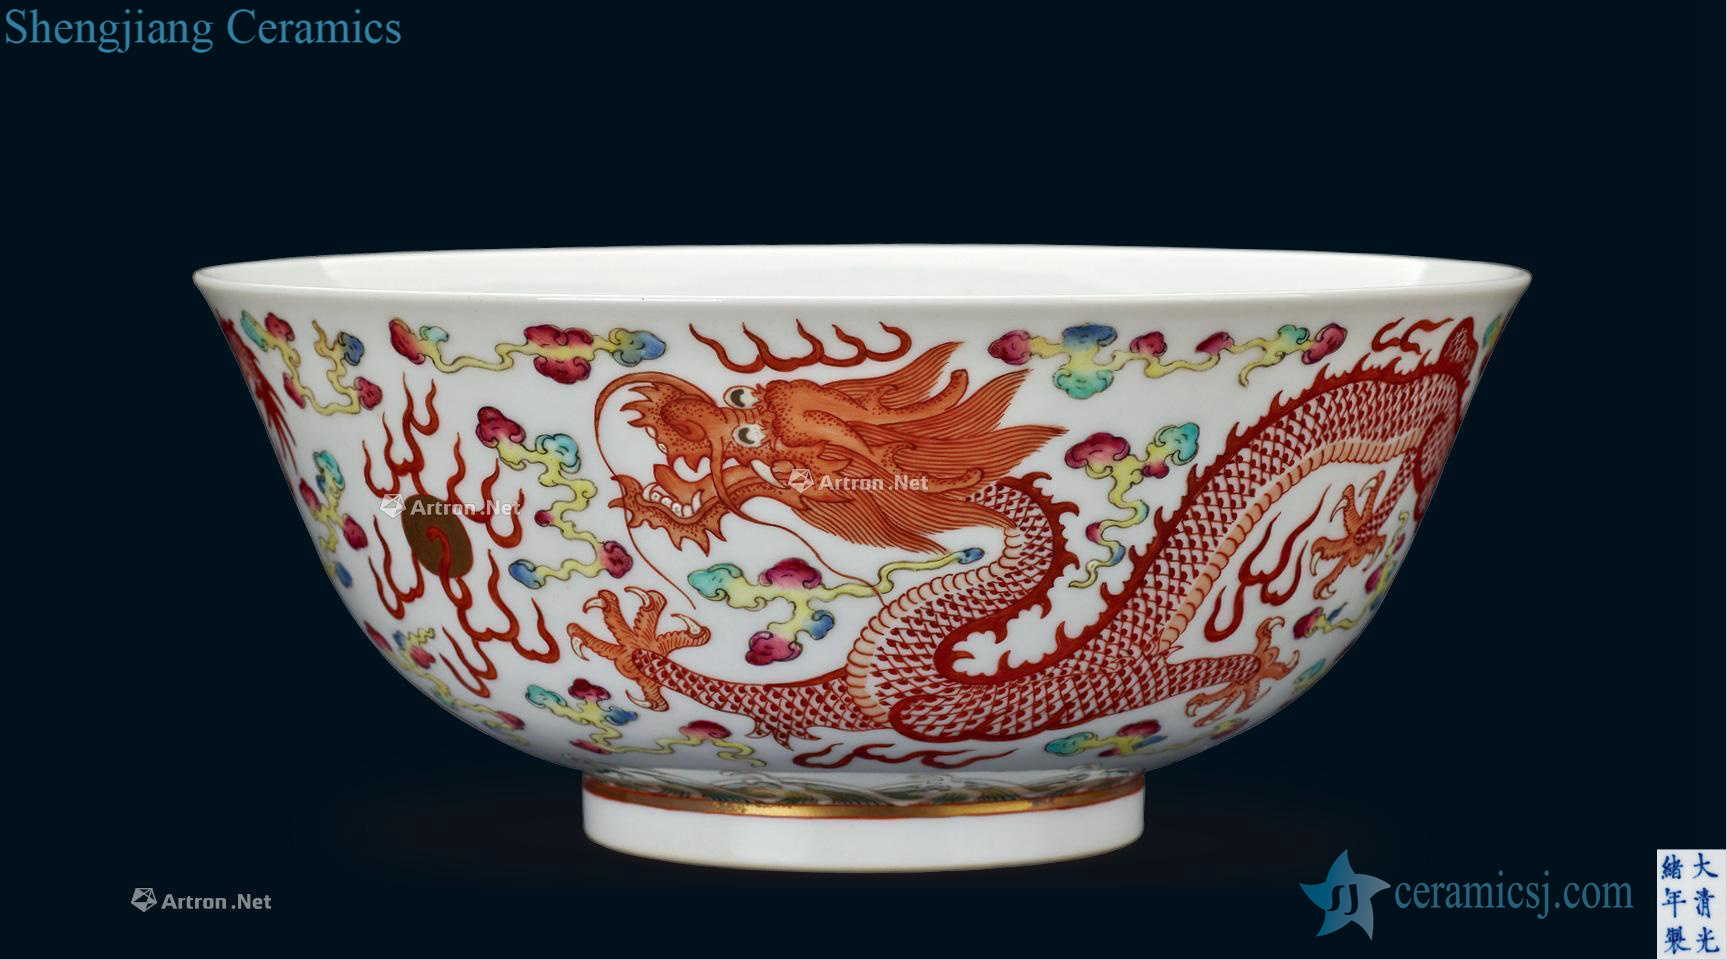 Ssangyong rob beads reign of qing emperor guangxu green-splashed bowls